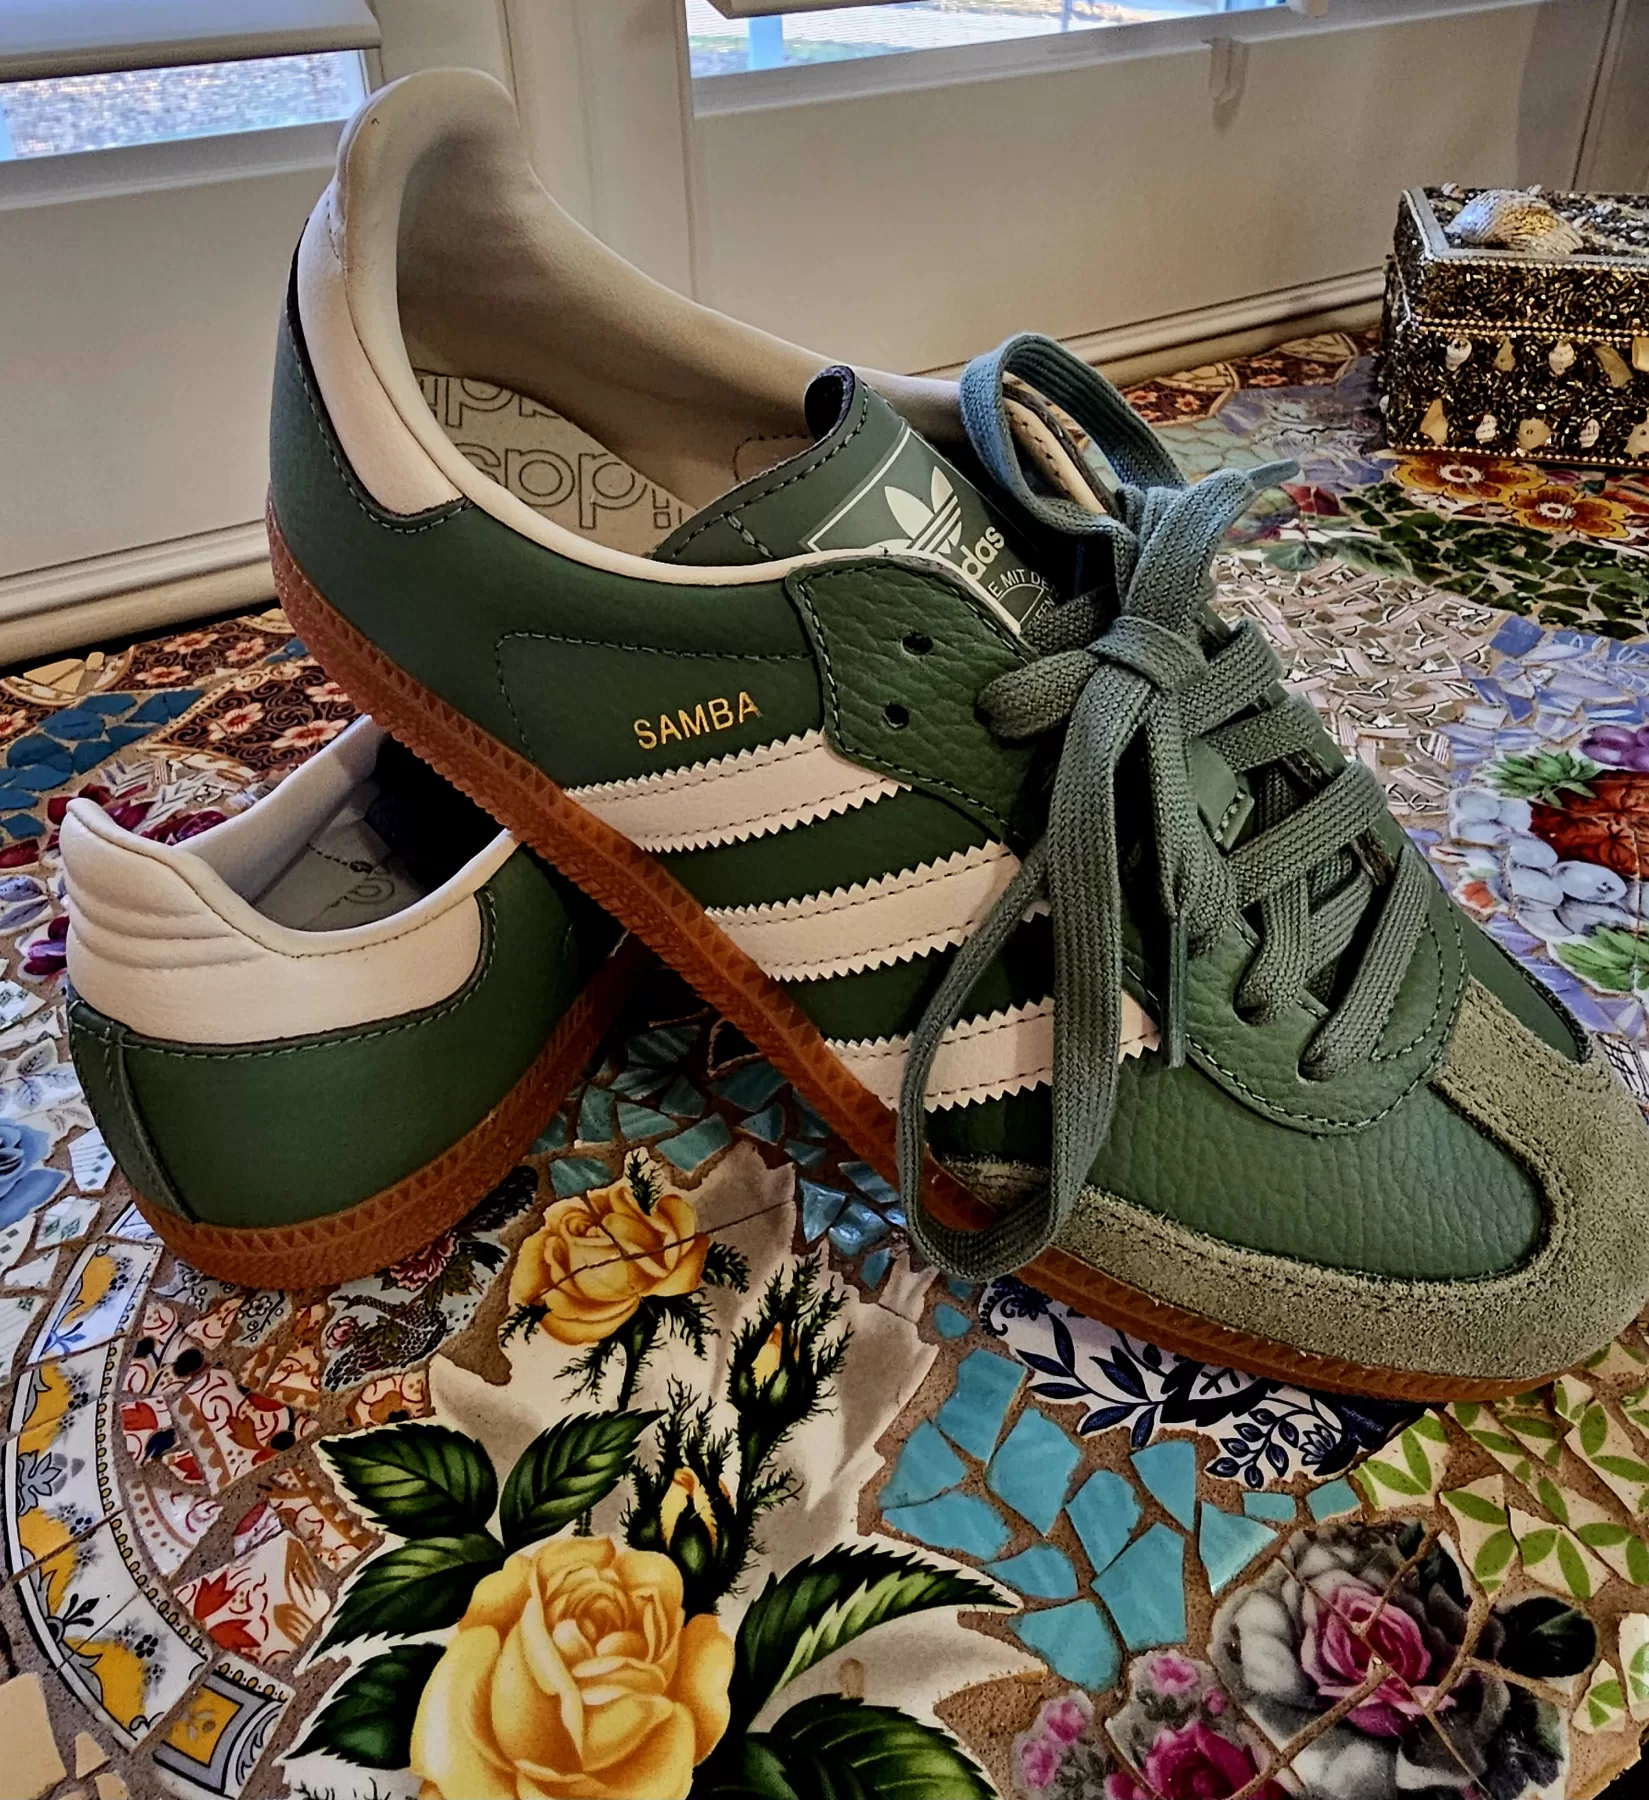 adidas Samba walking shoes in green with three stripes down the side.  Perfect for long walks and exercise on the San Antonio River Walk. Texas